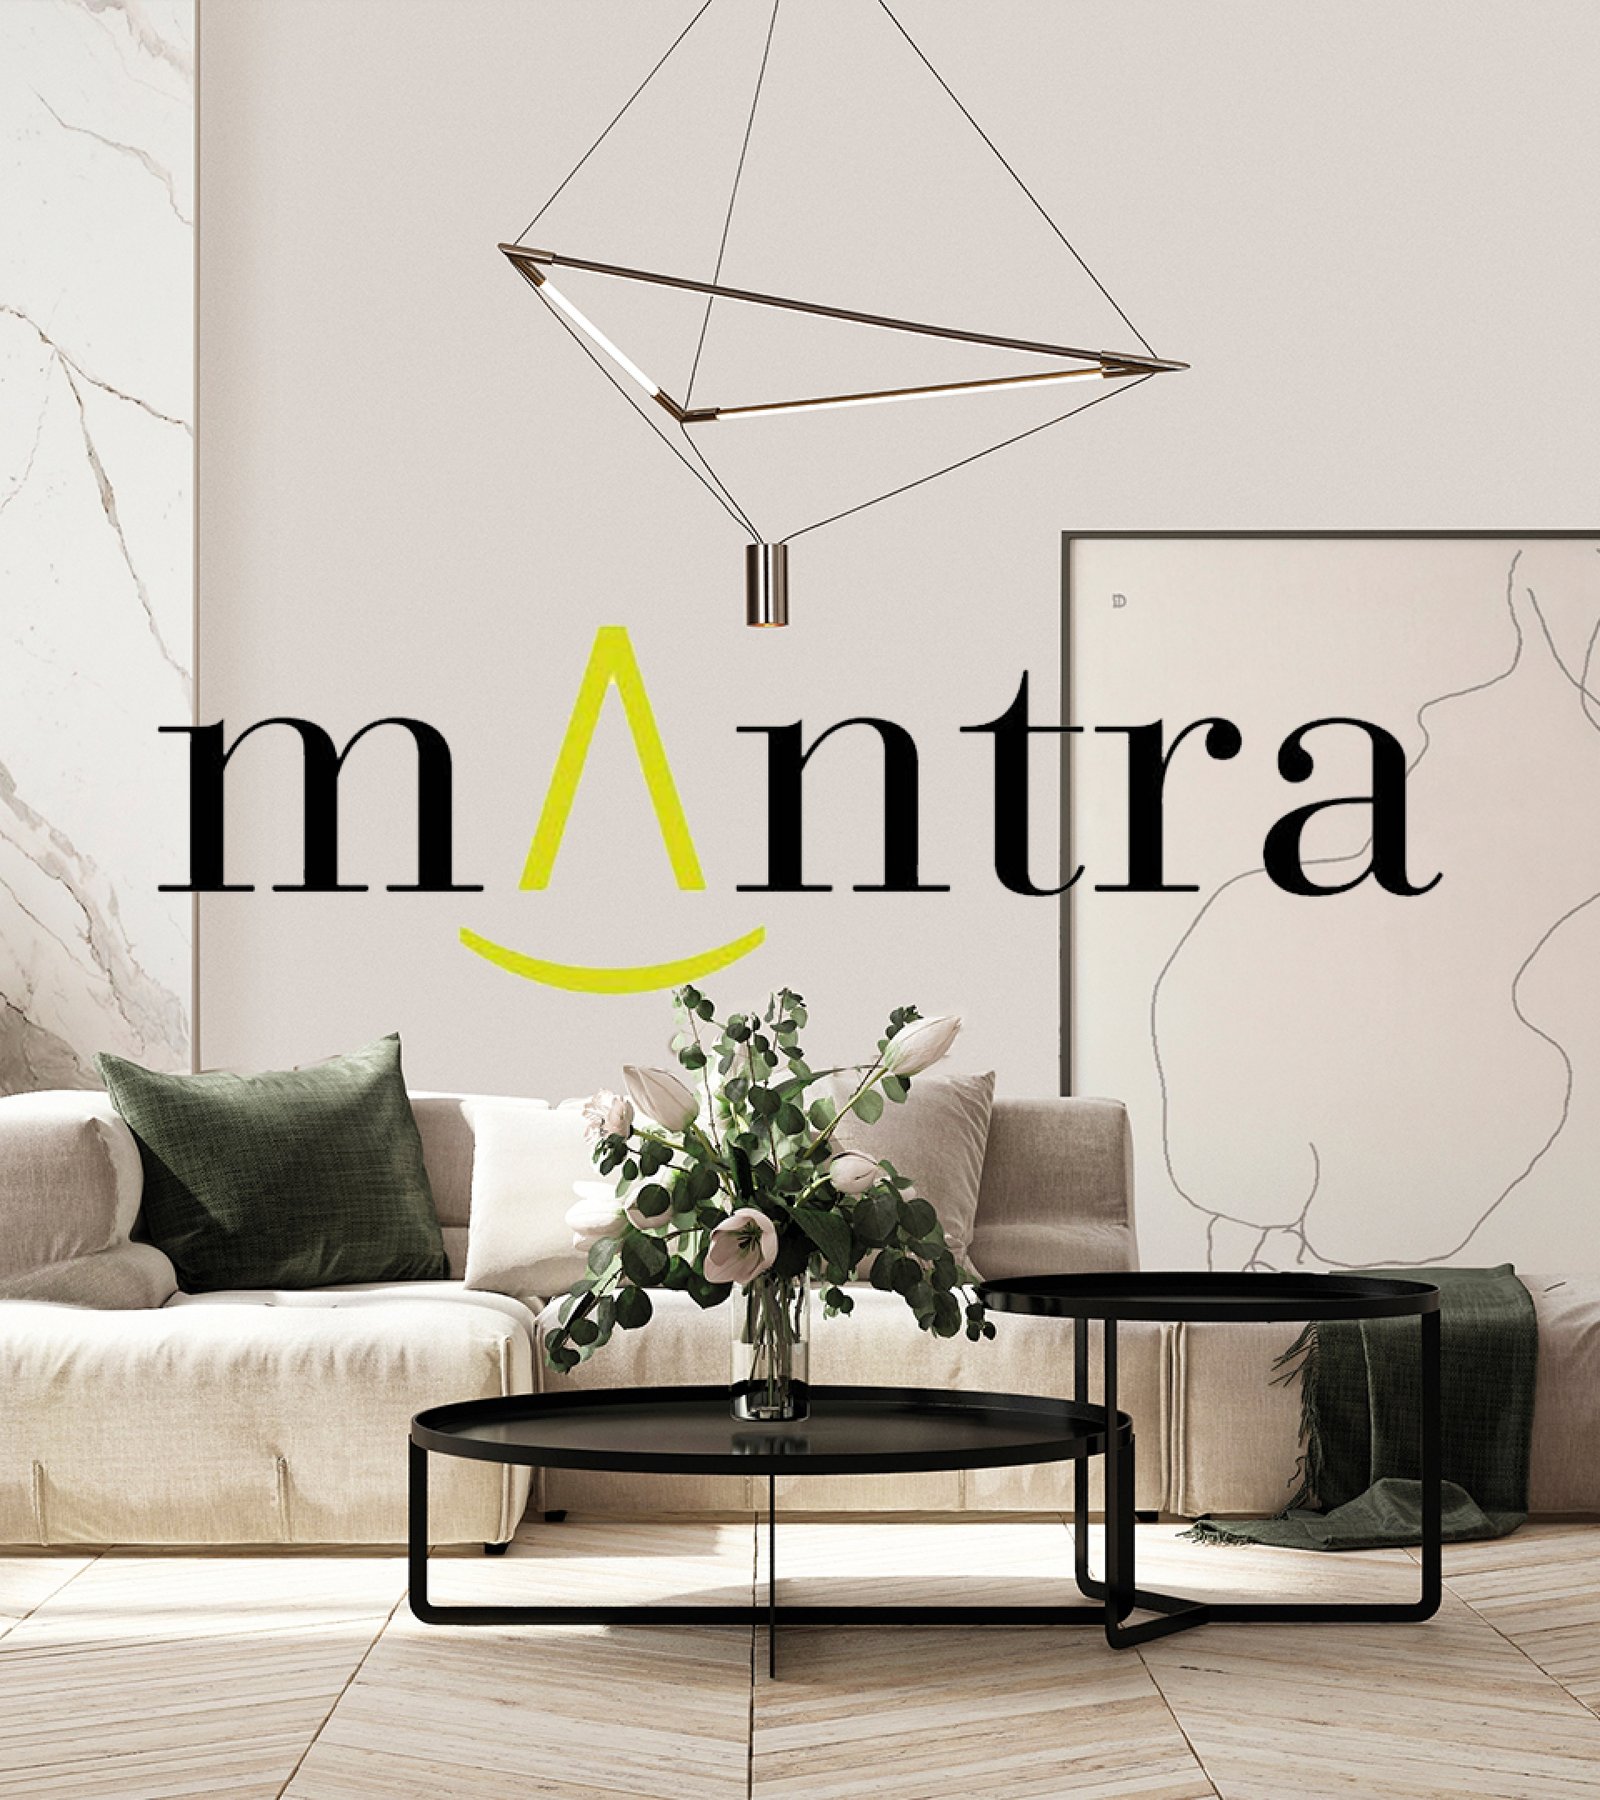 mantra distributeri_pages-to-jpg-0001